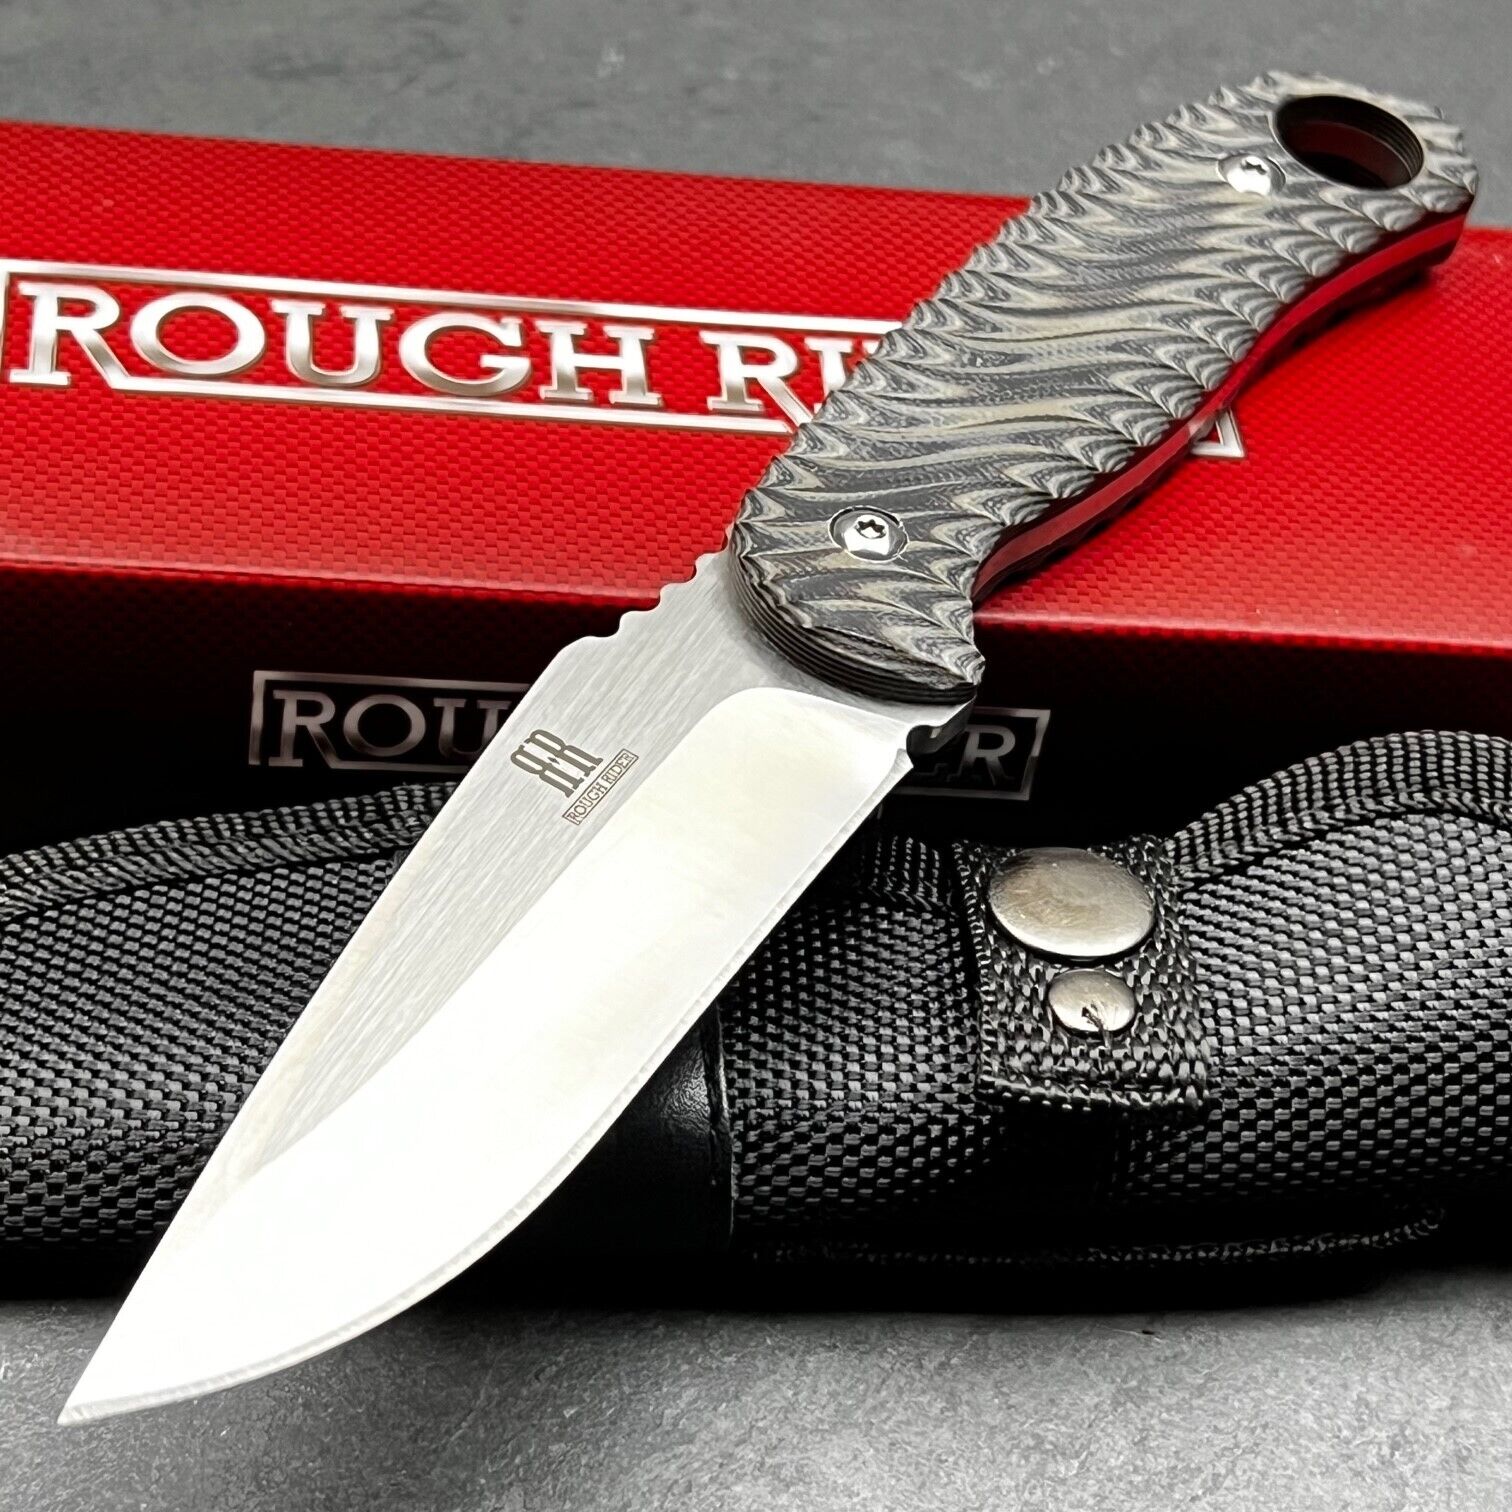 ROUGH RYDER Black G10 Fixed Blade Full Tang Hunting Skinning Knife with Sheath